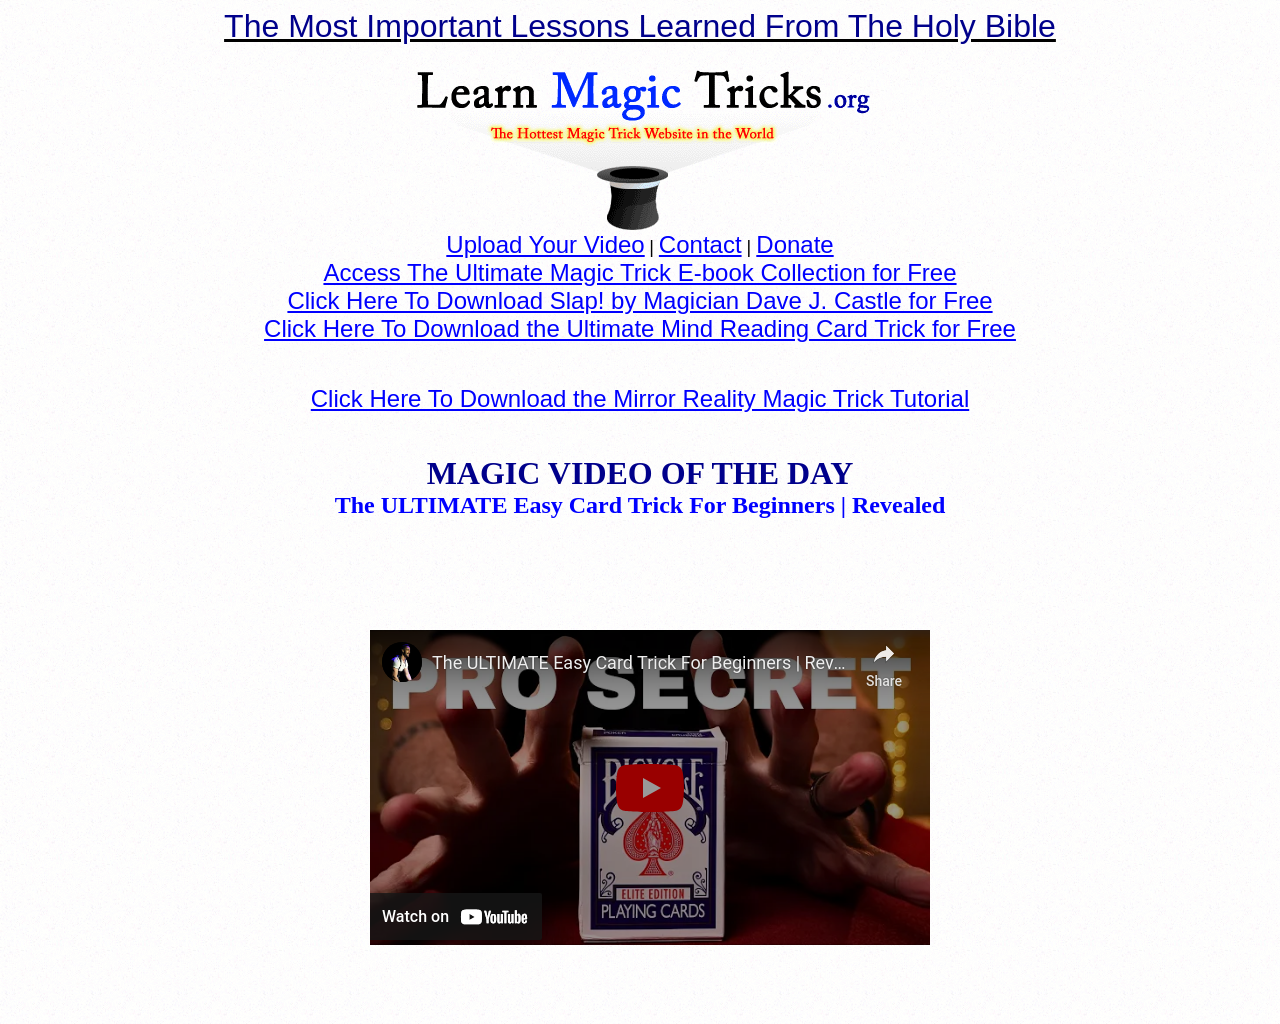 learnmagictricks.org